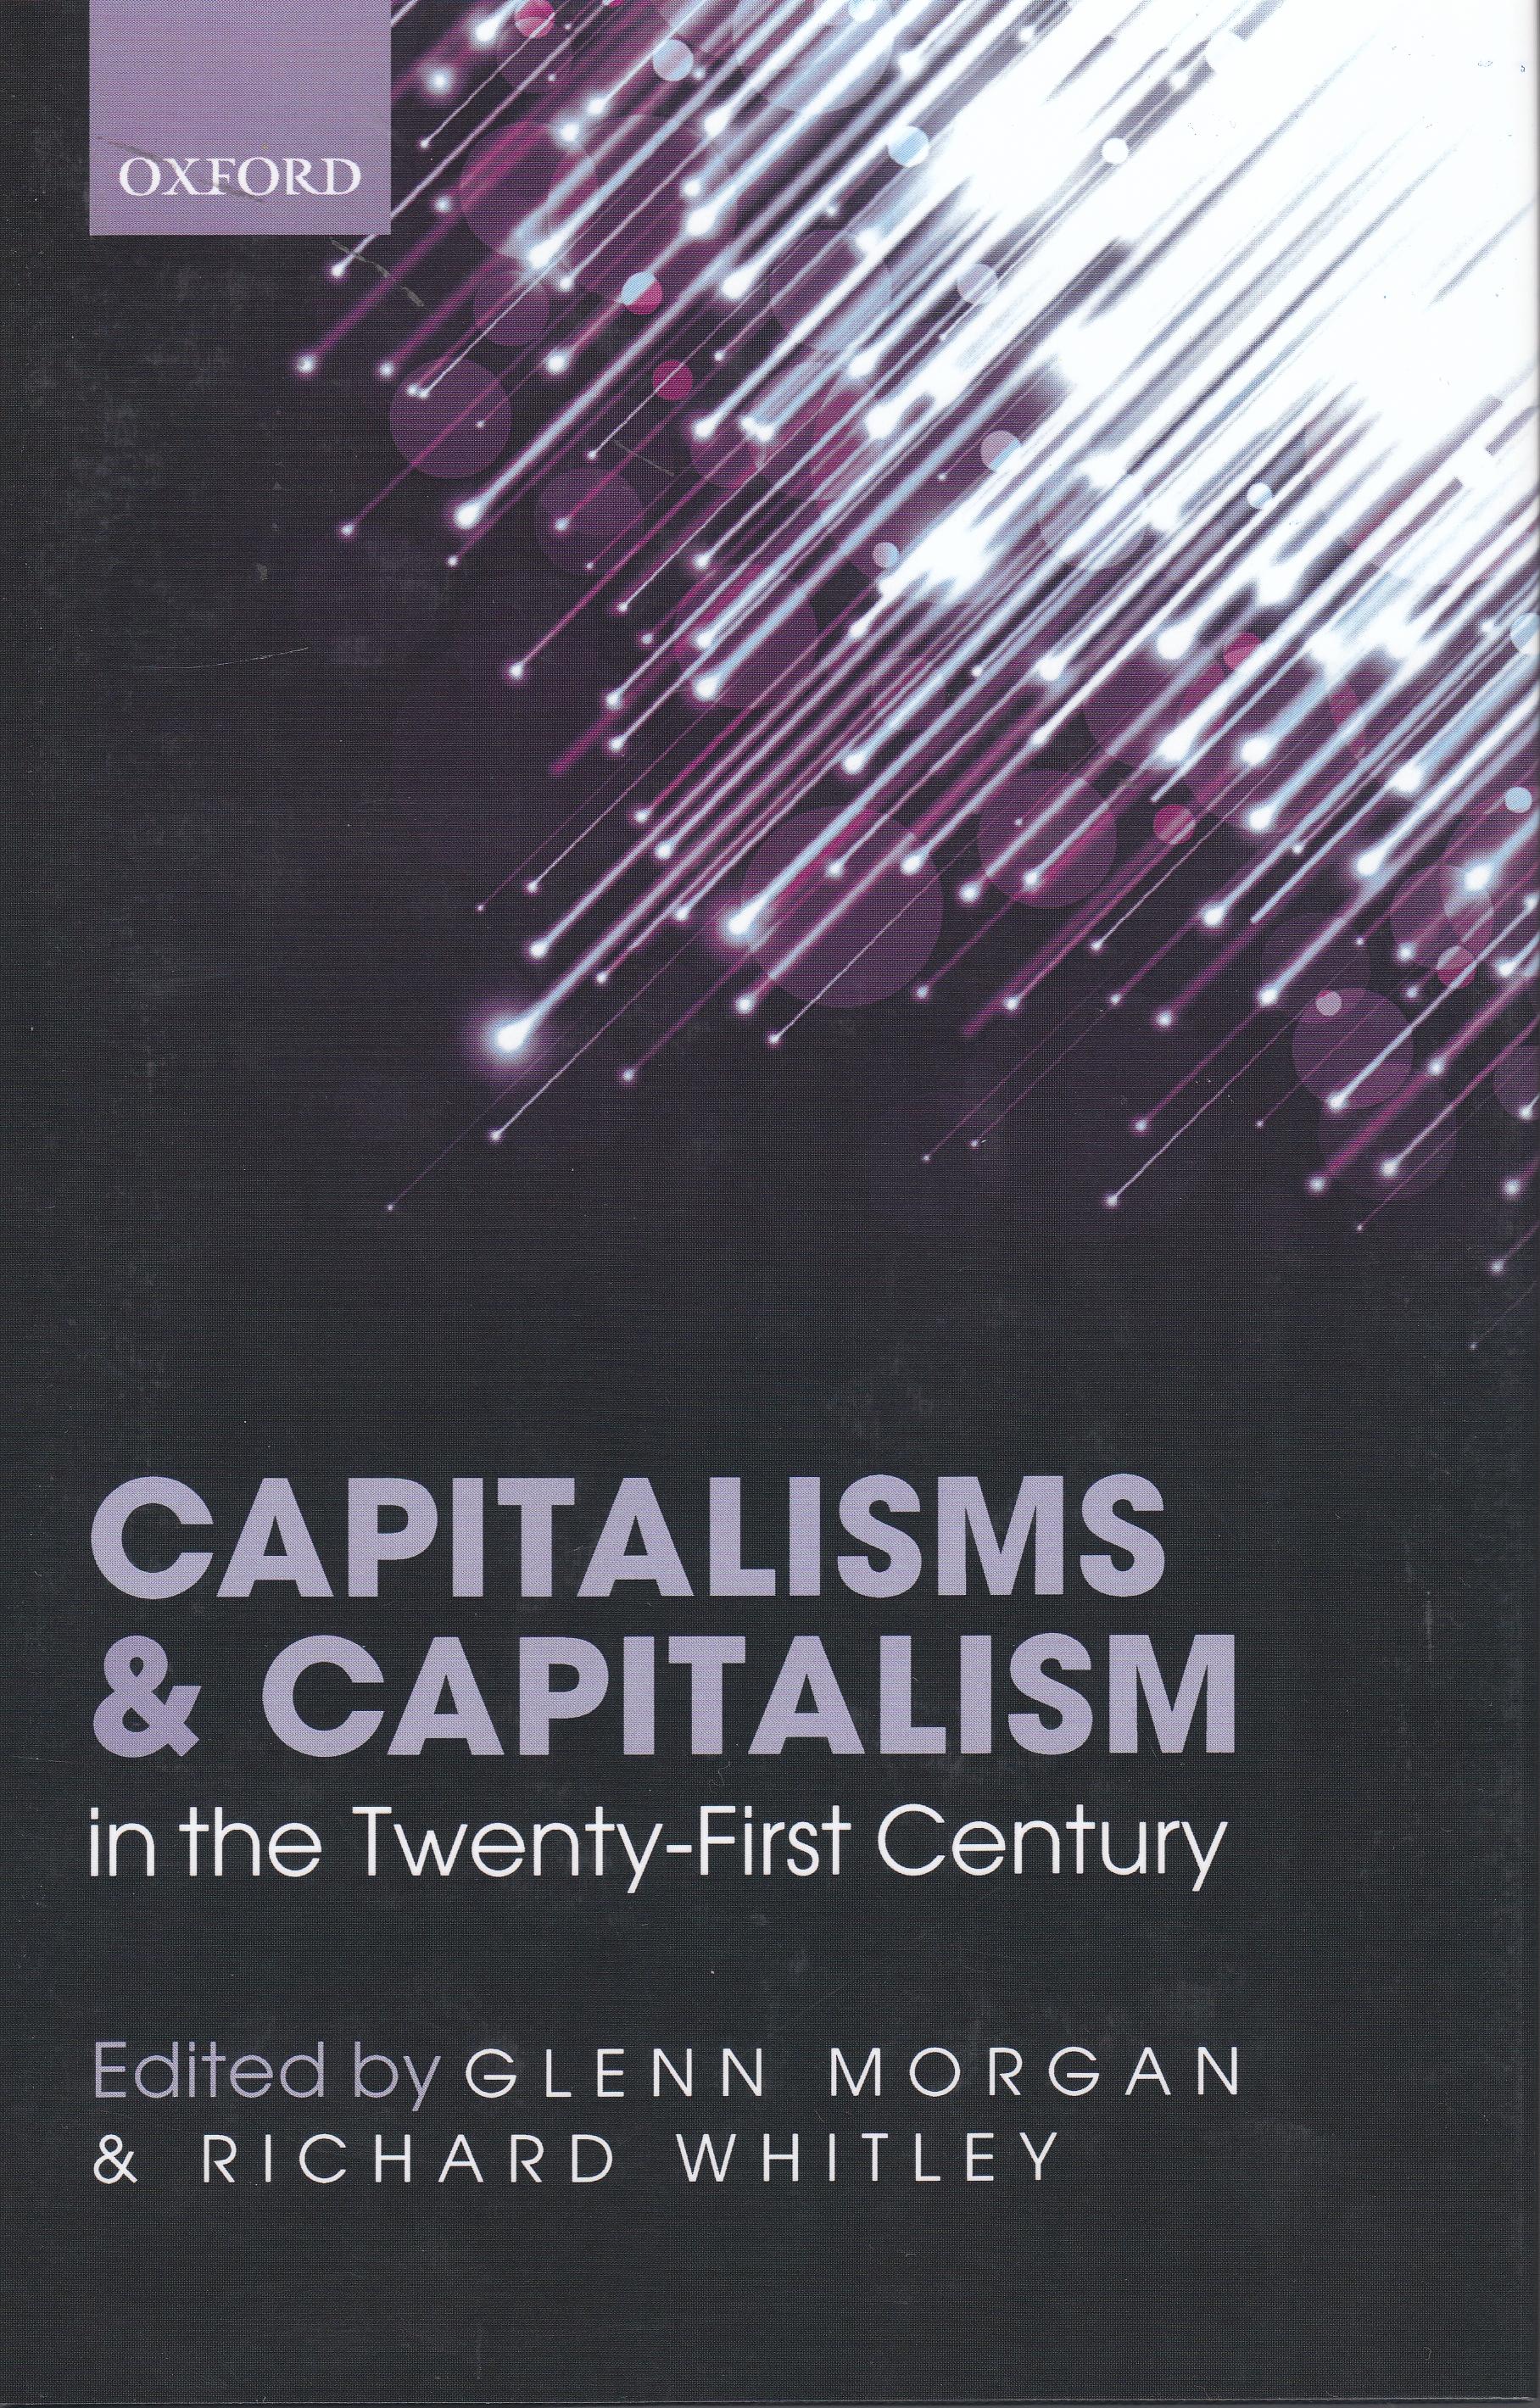 Capitalisms and Capitalism in the Twenty-first Century